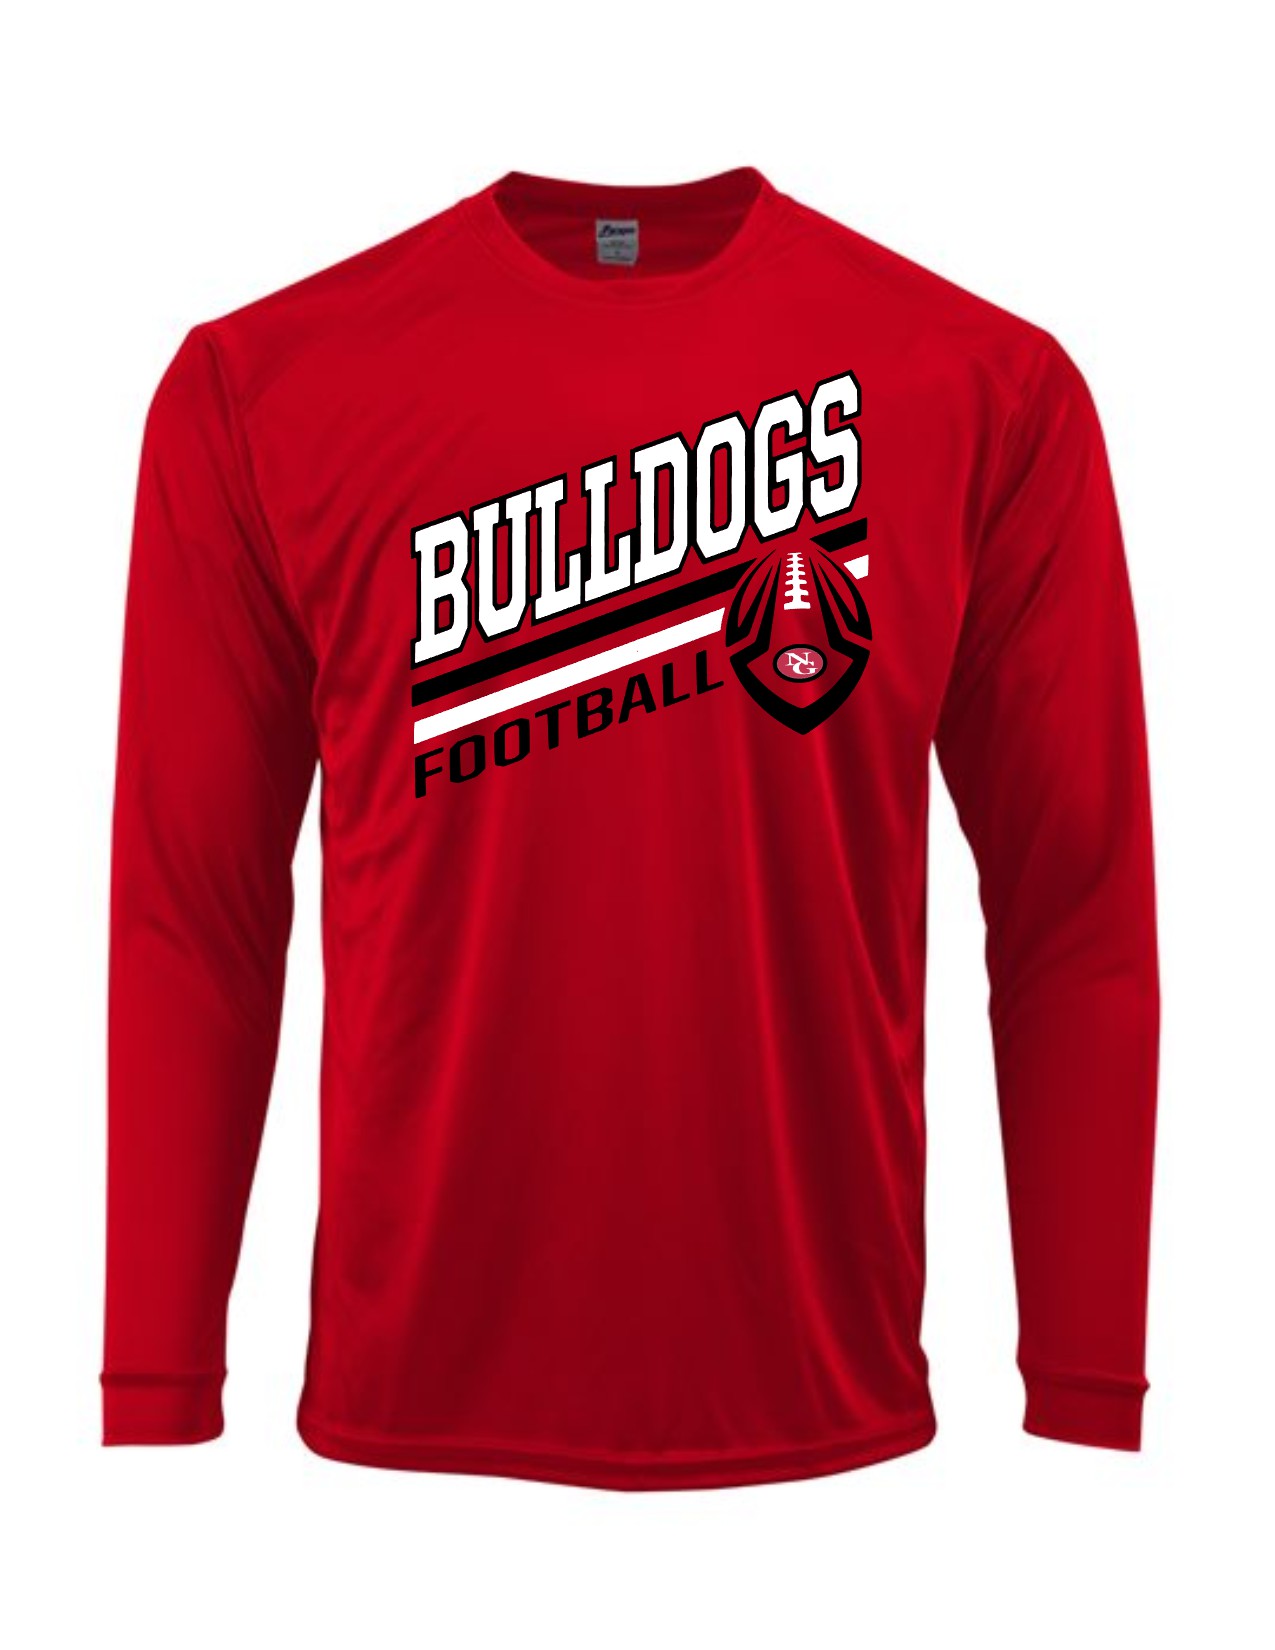 11U RED Roster Design - UNISEX Long Sleeve T-shirt - YOUTH and ADULT ...